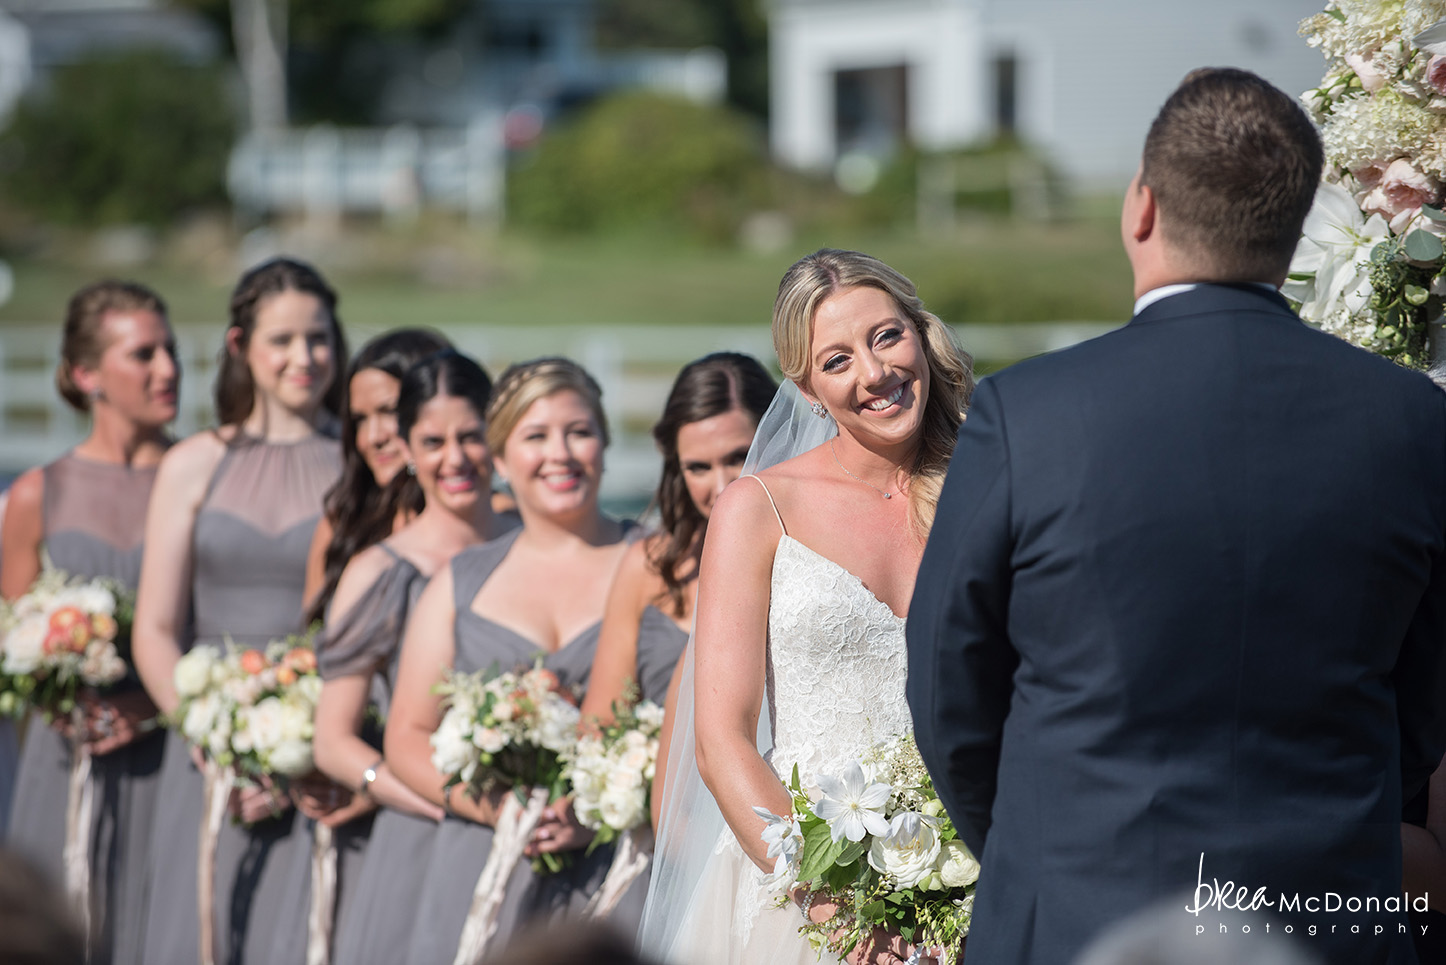 Maine wedding officiant